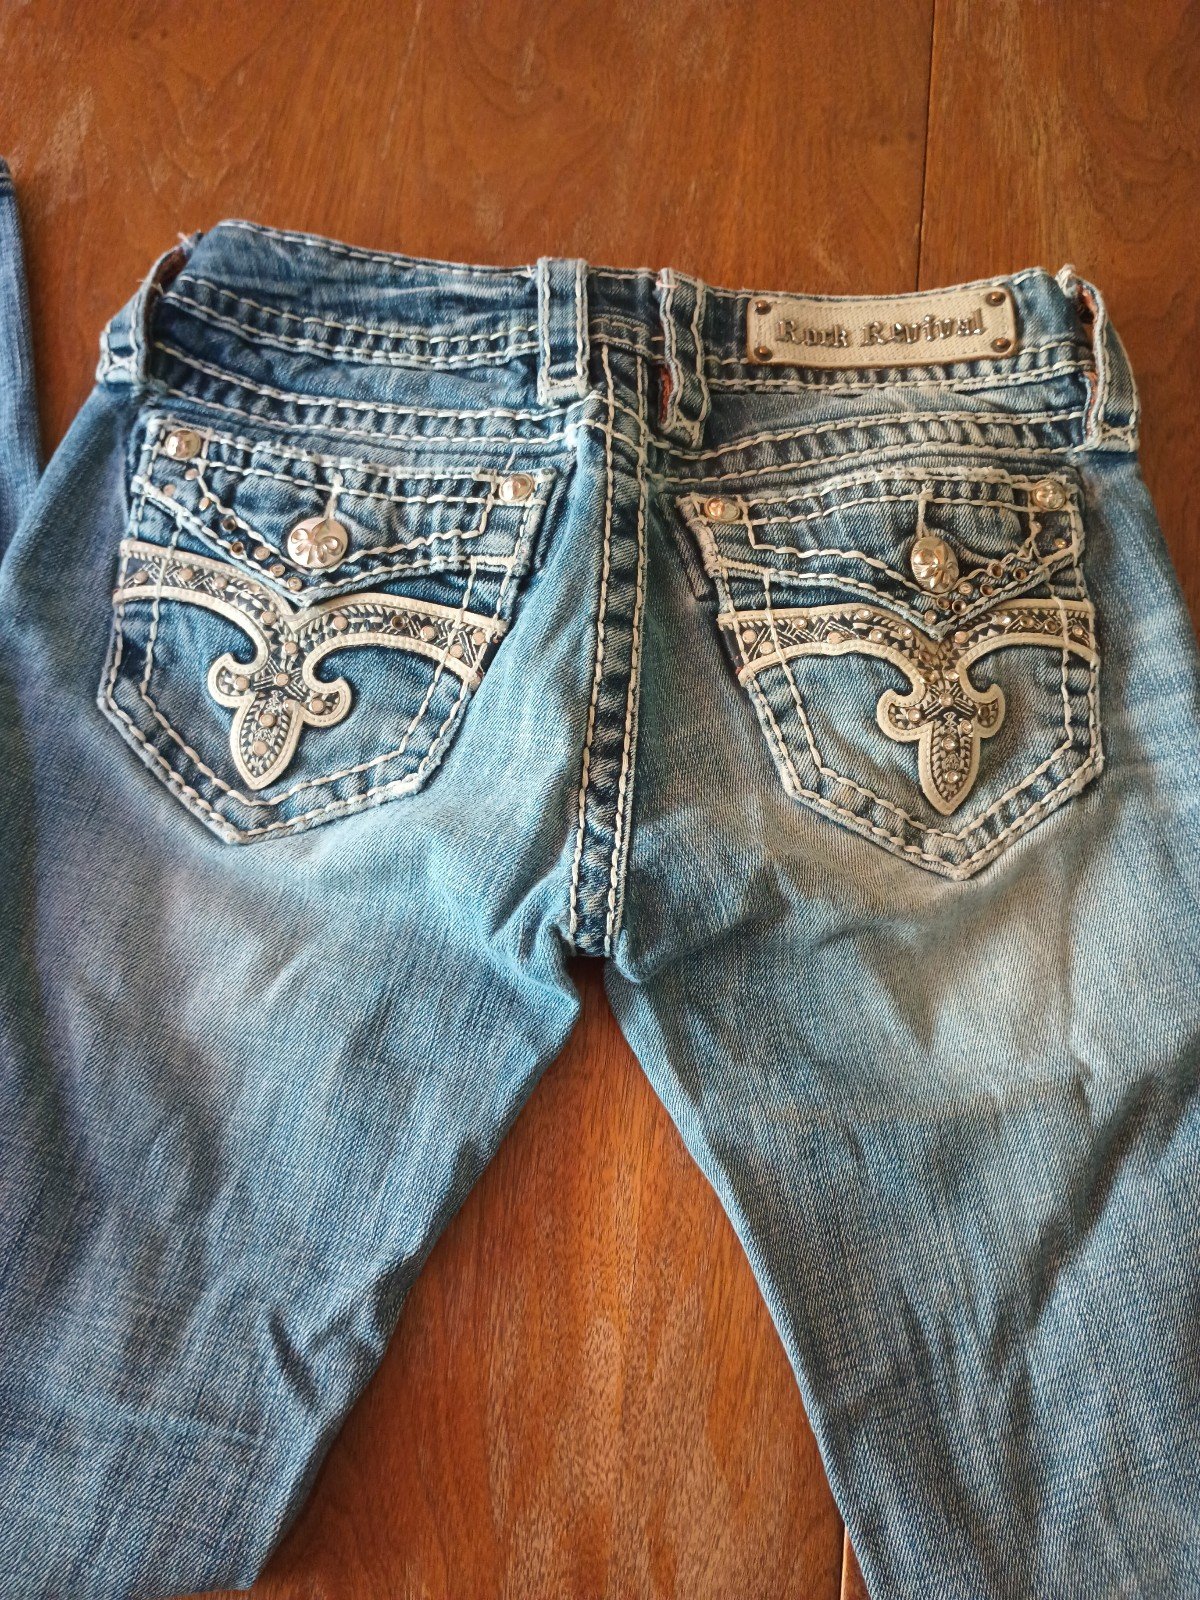 Latest  Rock Revival jeans women distressed size 26 NxEBfMqDg just for you